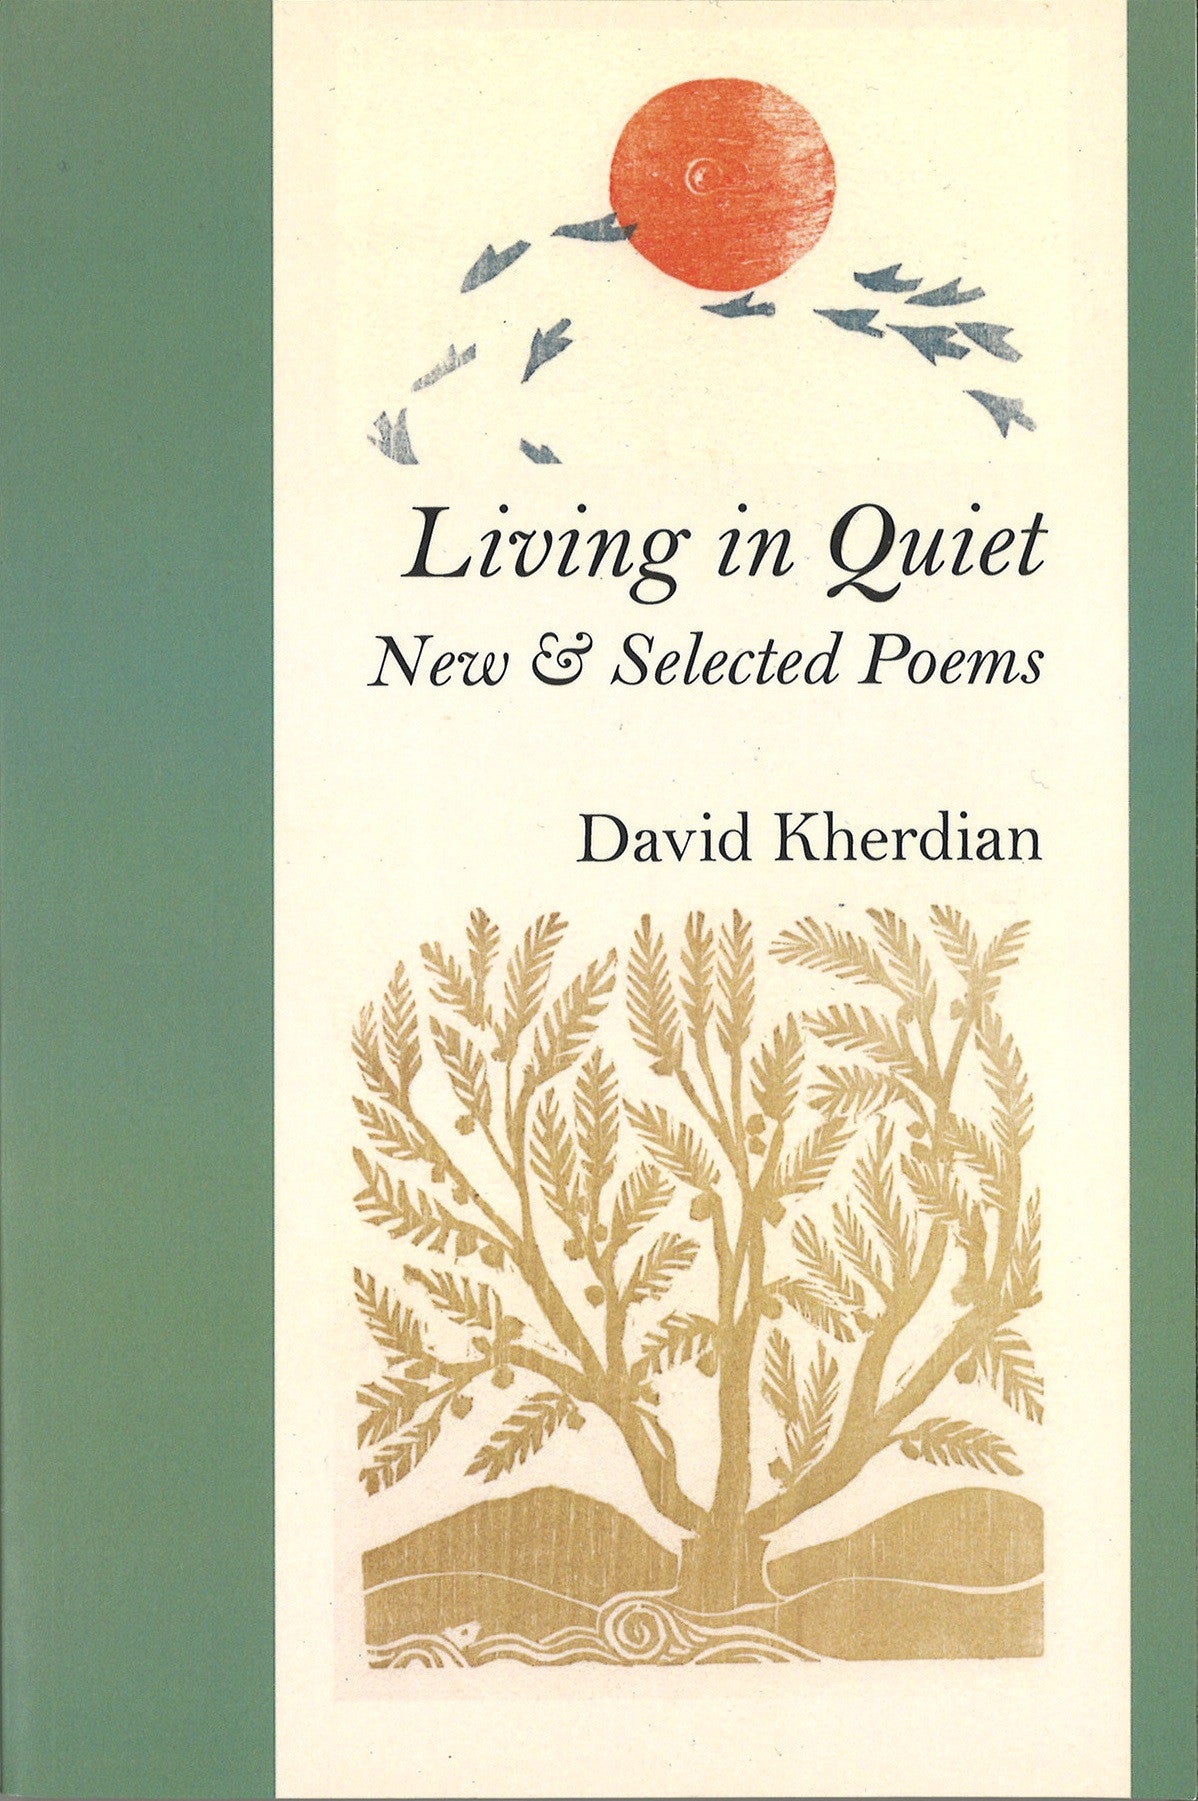 LIVING IN QUIET: New & Selected Poems